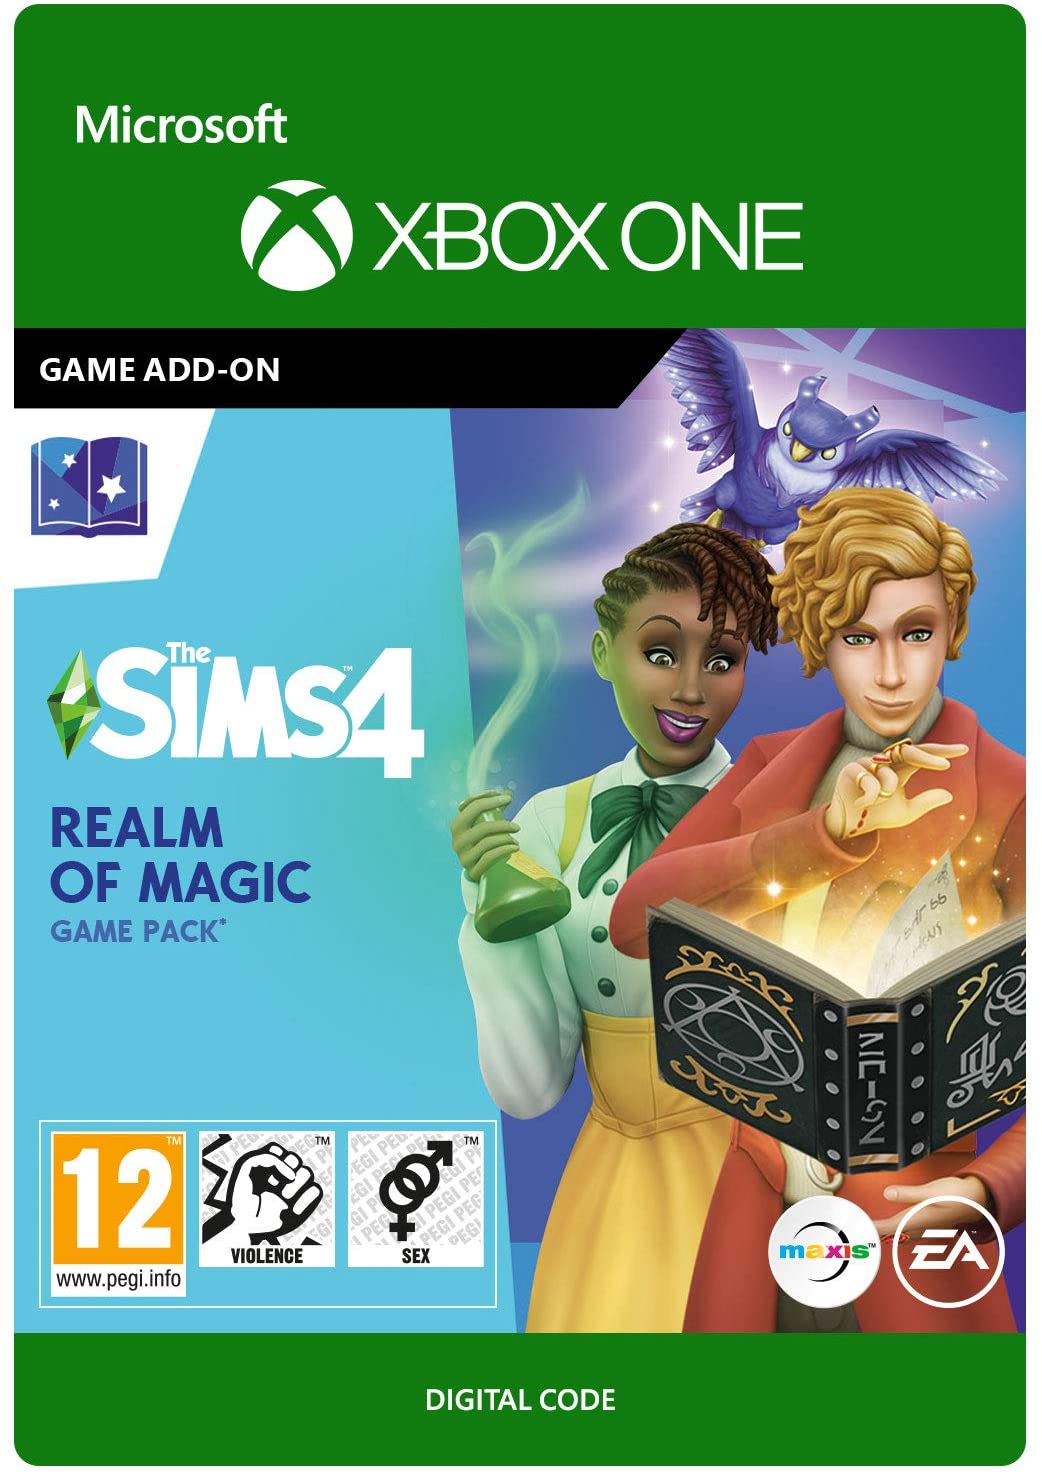 The Sims 4: Realm of Magic Digital Download Key (Xbox One): Europe - 